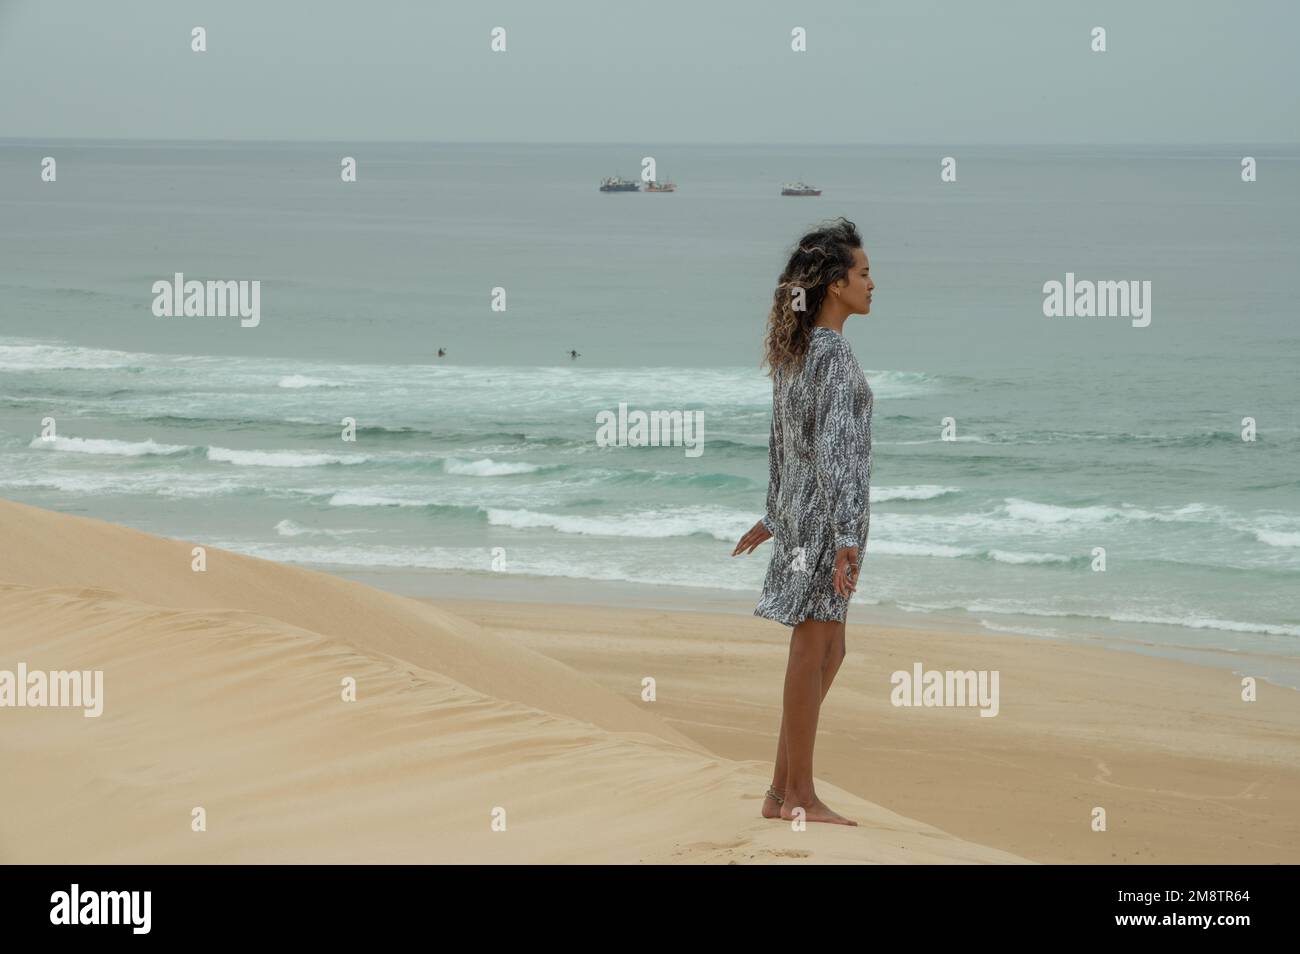 Woman seen at beach with boats in horizon Stock Photo